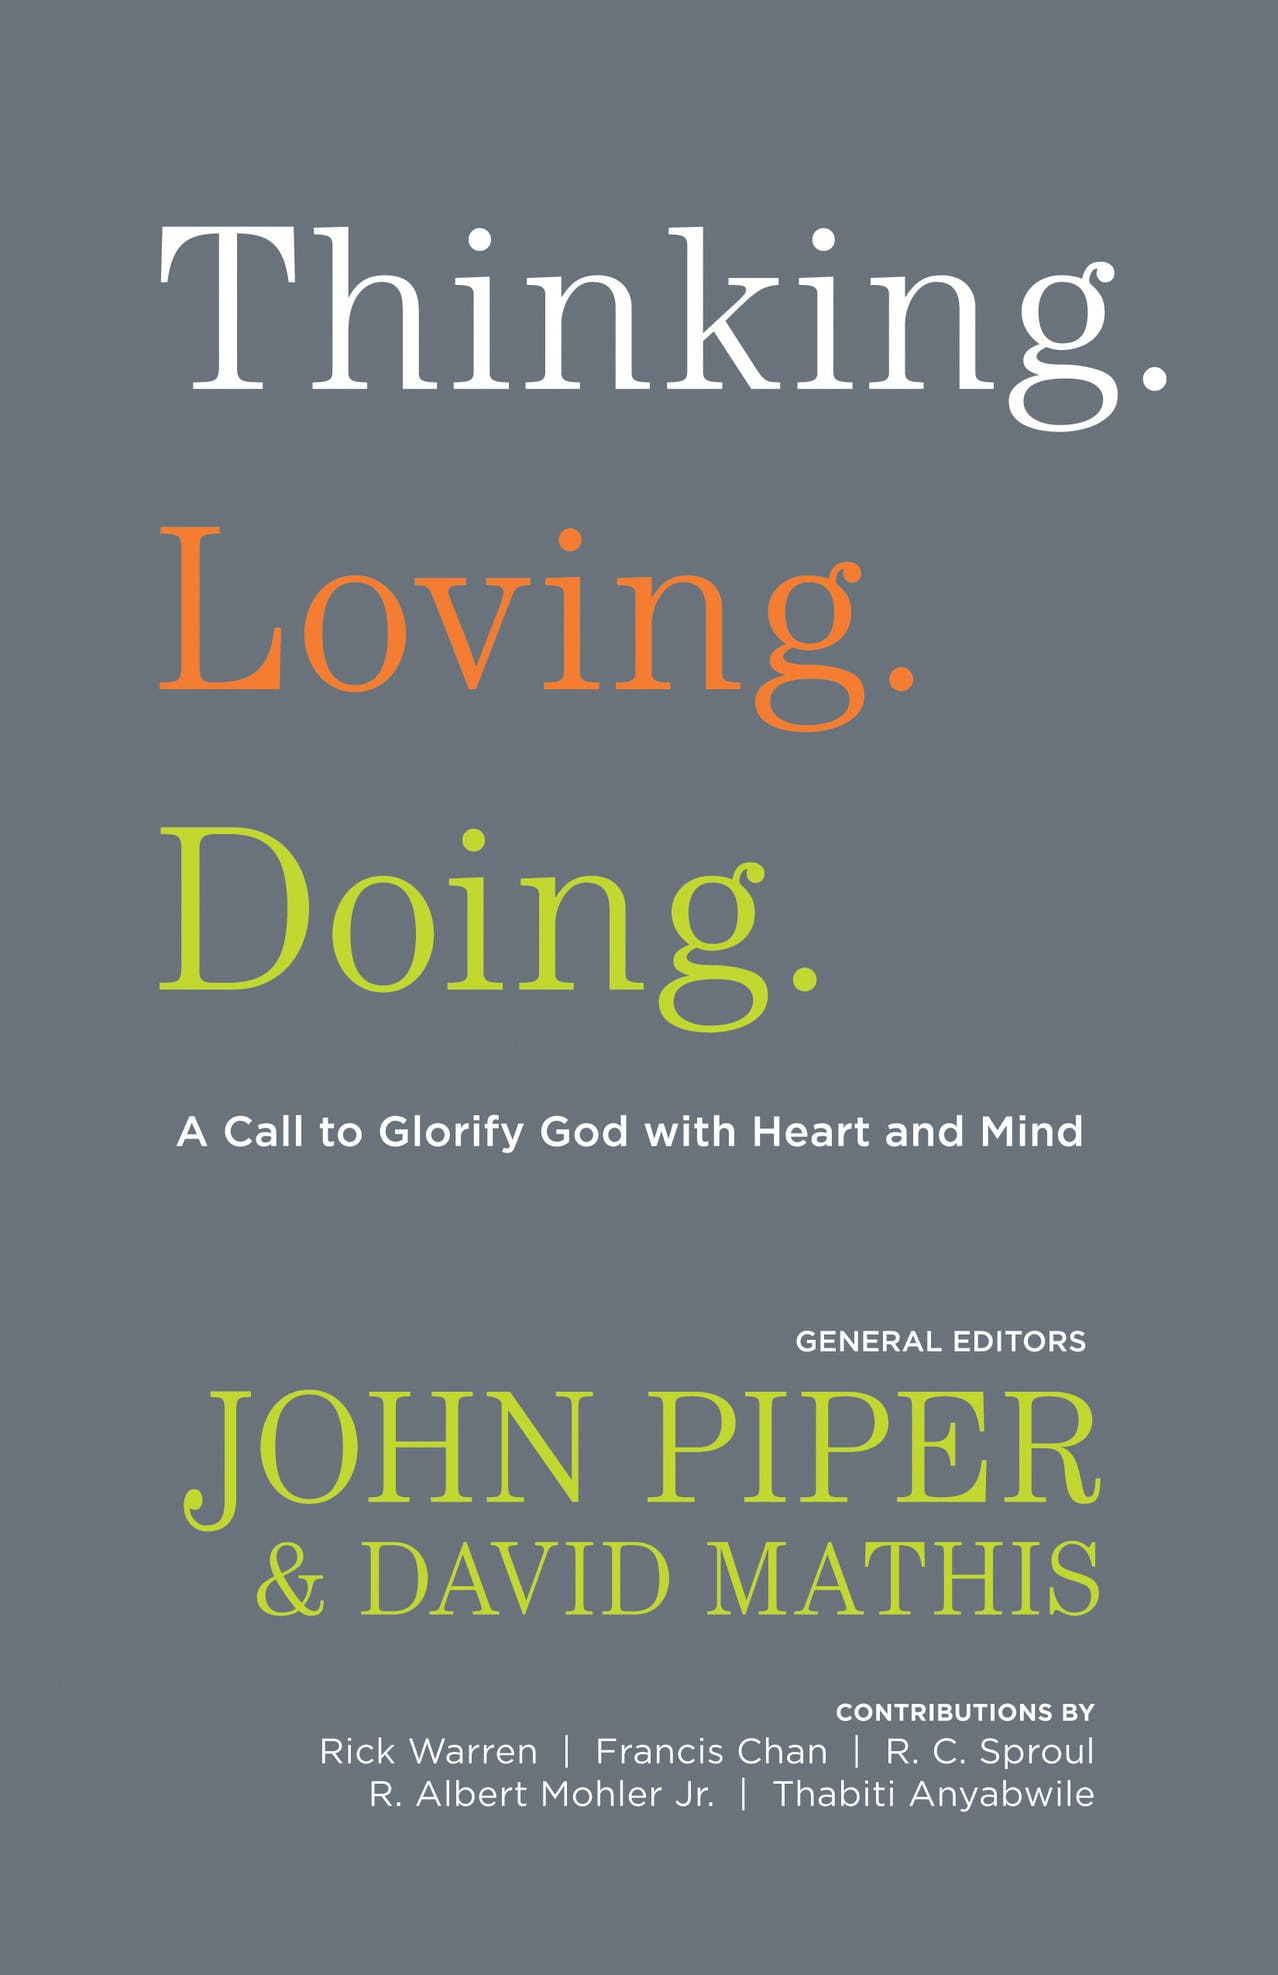 DOWNLOAD PDF: Thinking, Loving, Doing by John Piper 18